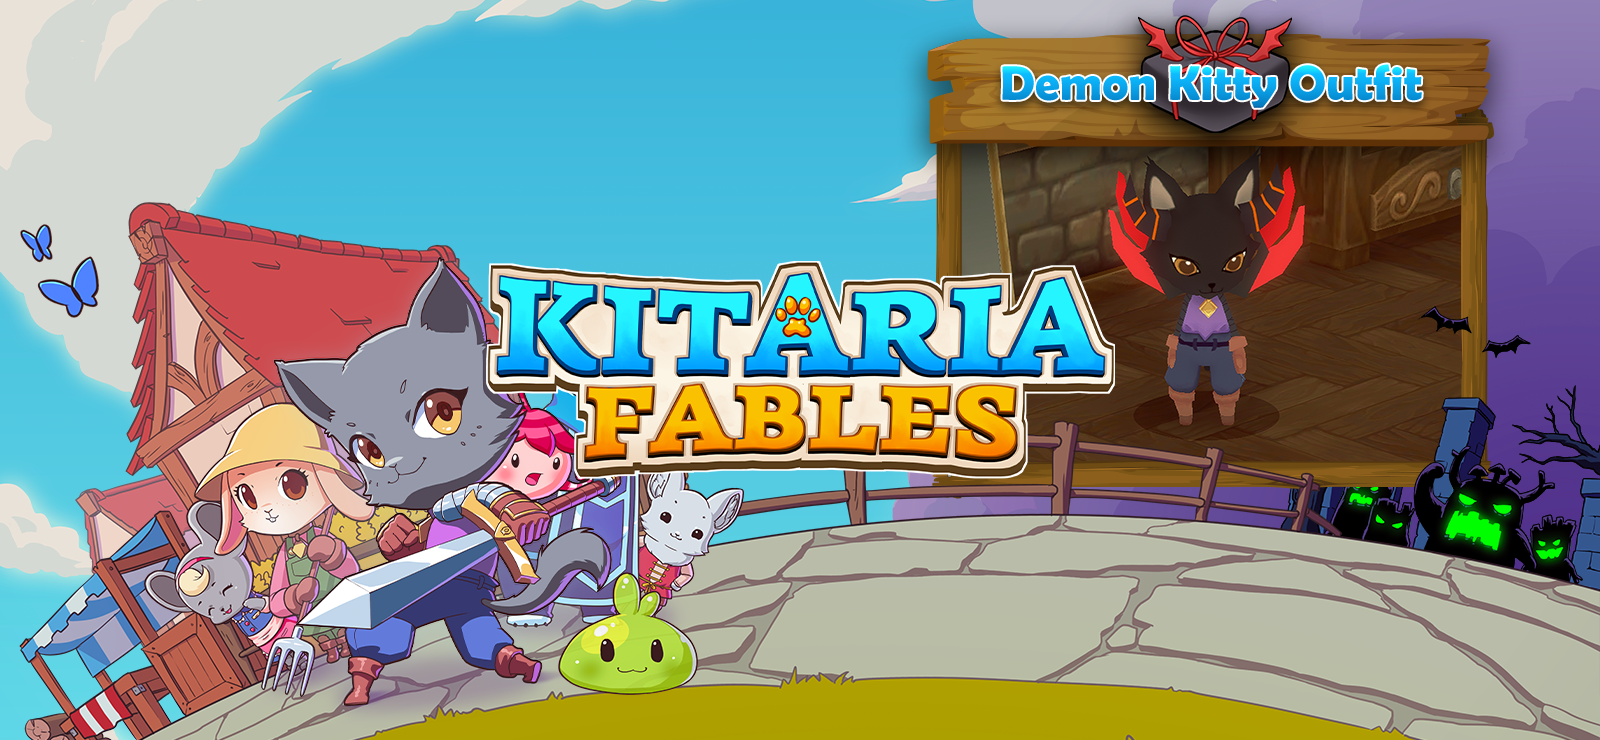 Kitaria Fables - Demon Kitty Outfit